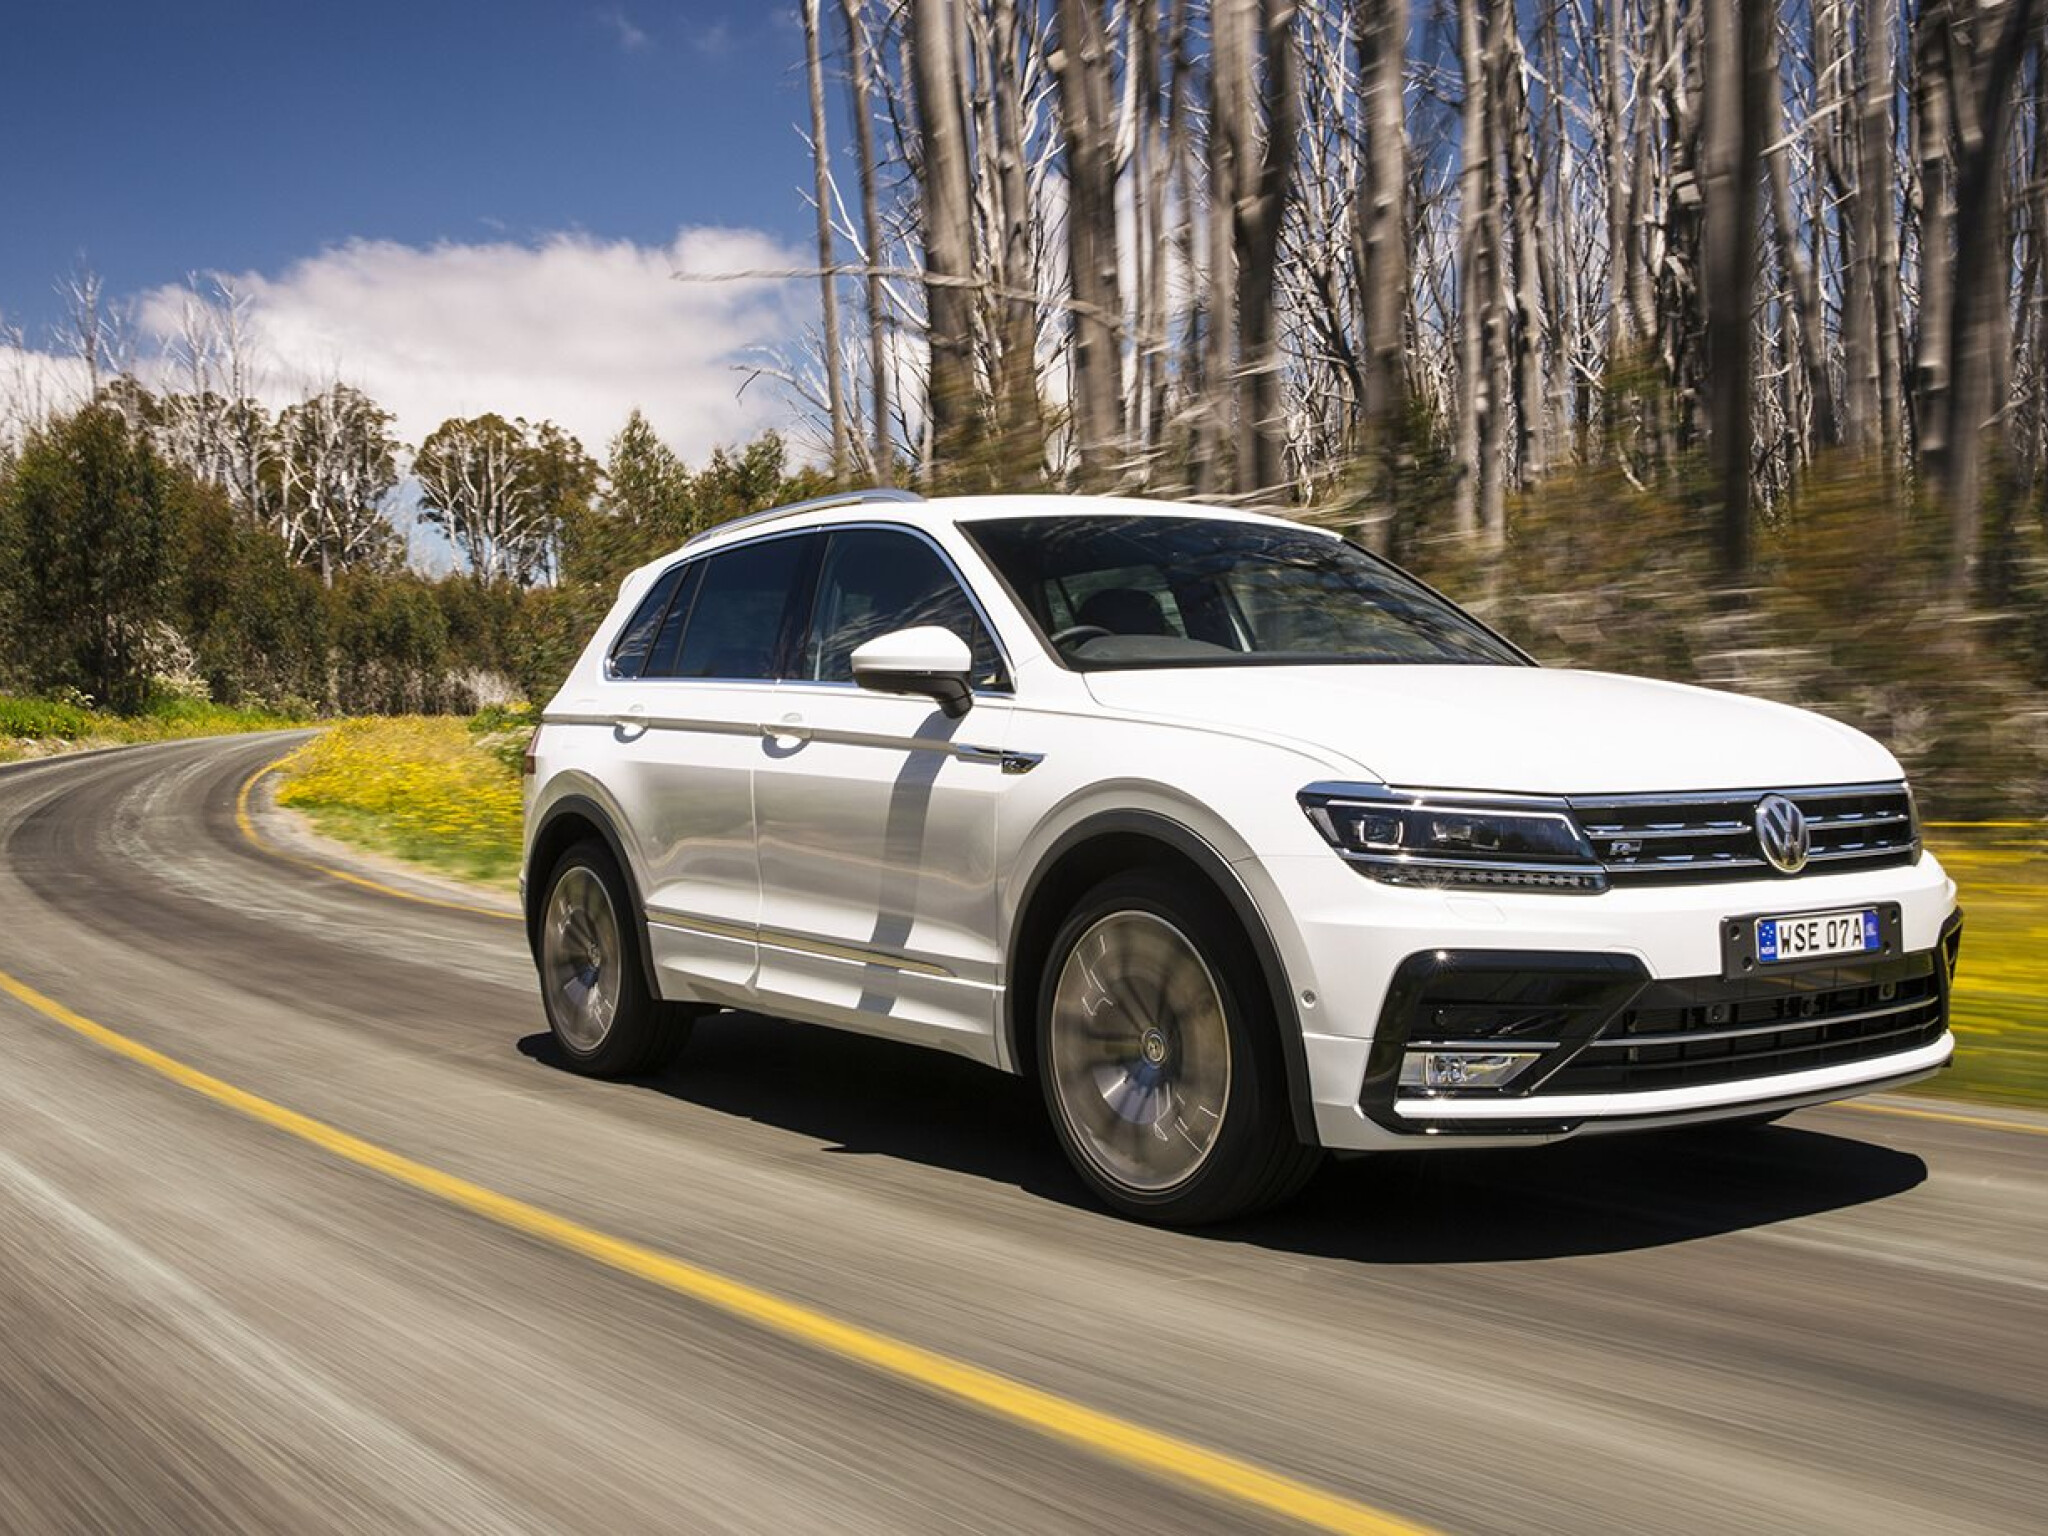 Volkswagen Tiguan 2020 Review, Price and Features